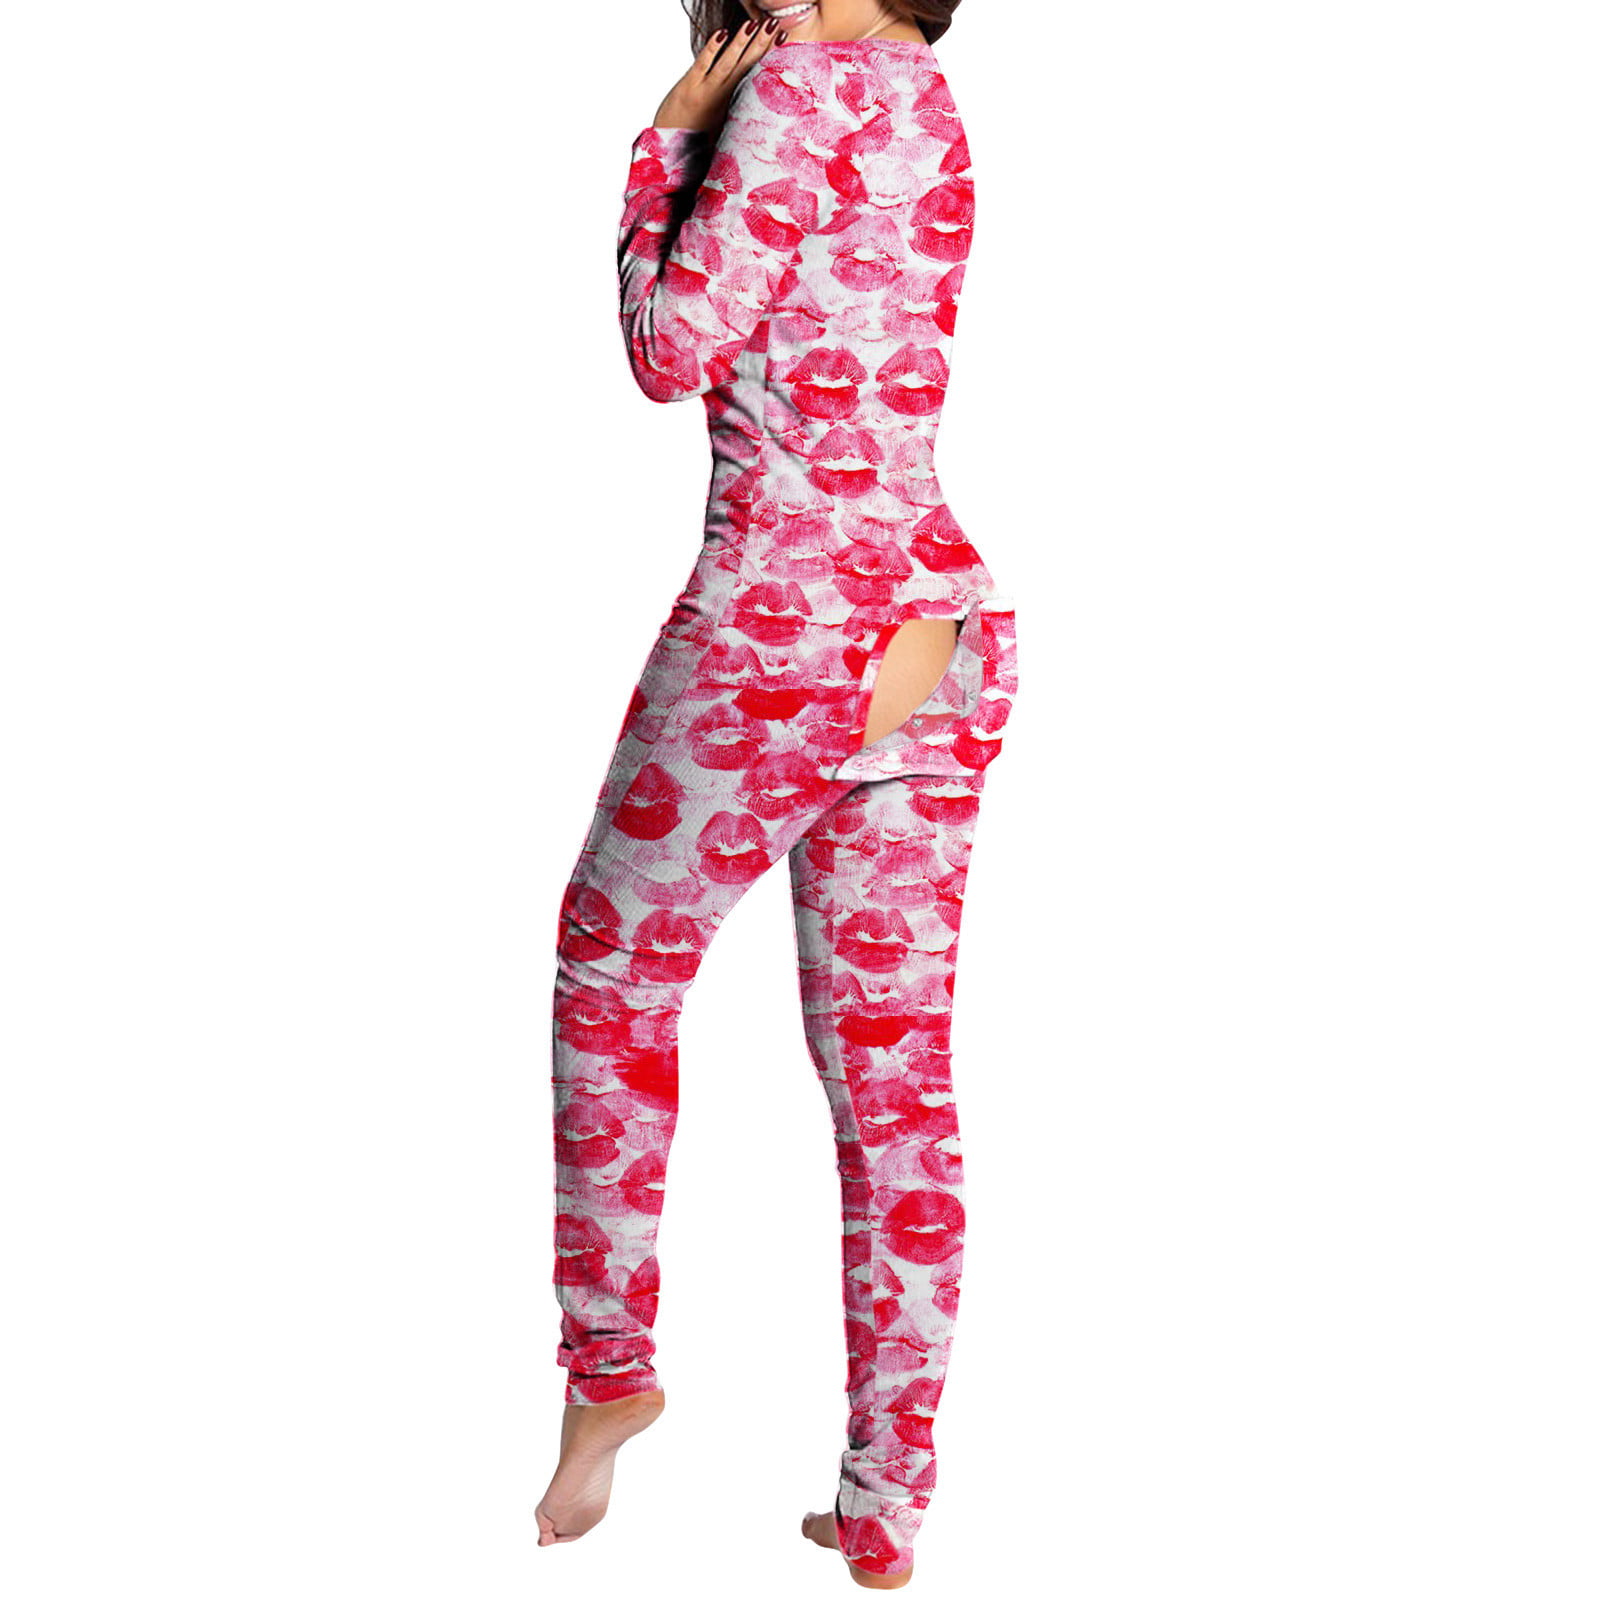 Plain and Printed Functional Button-Style flip-Over Pajamas for Adult Women 